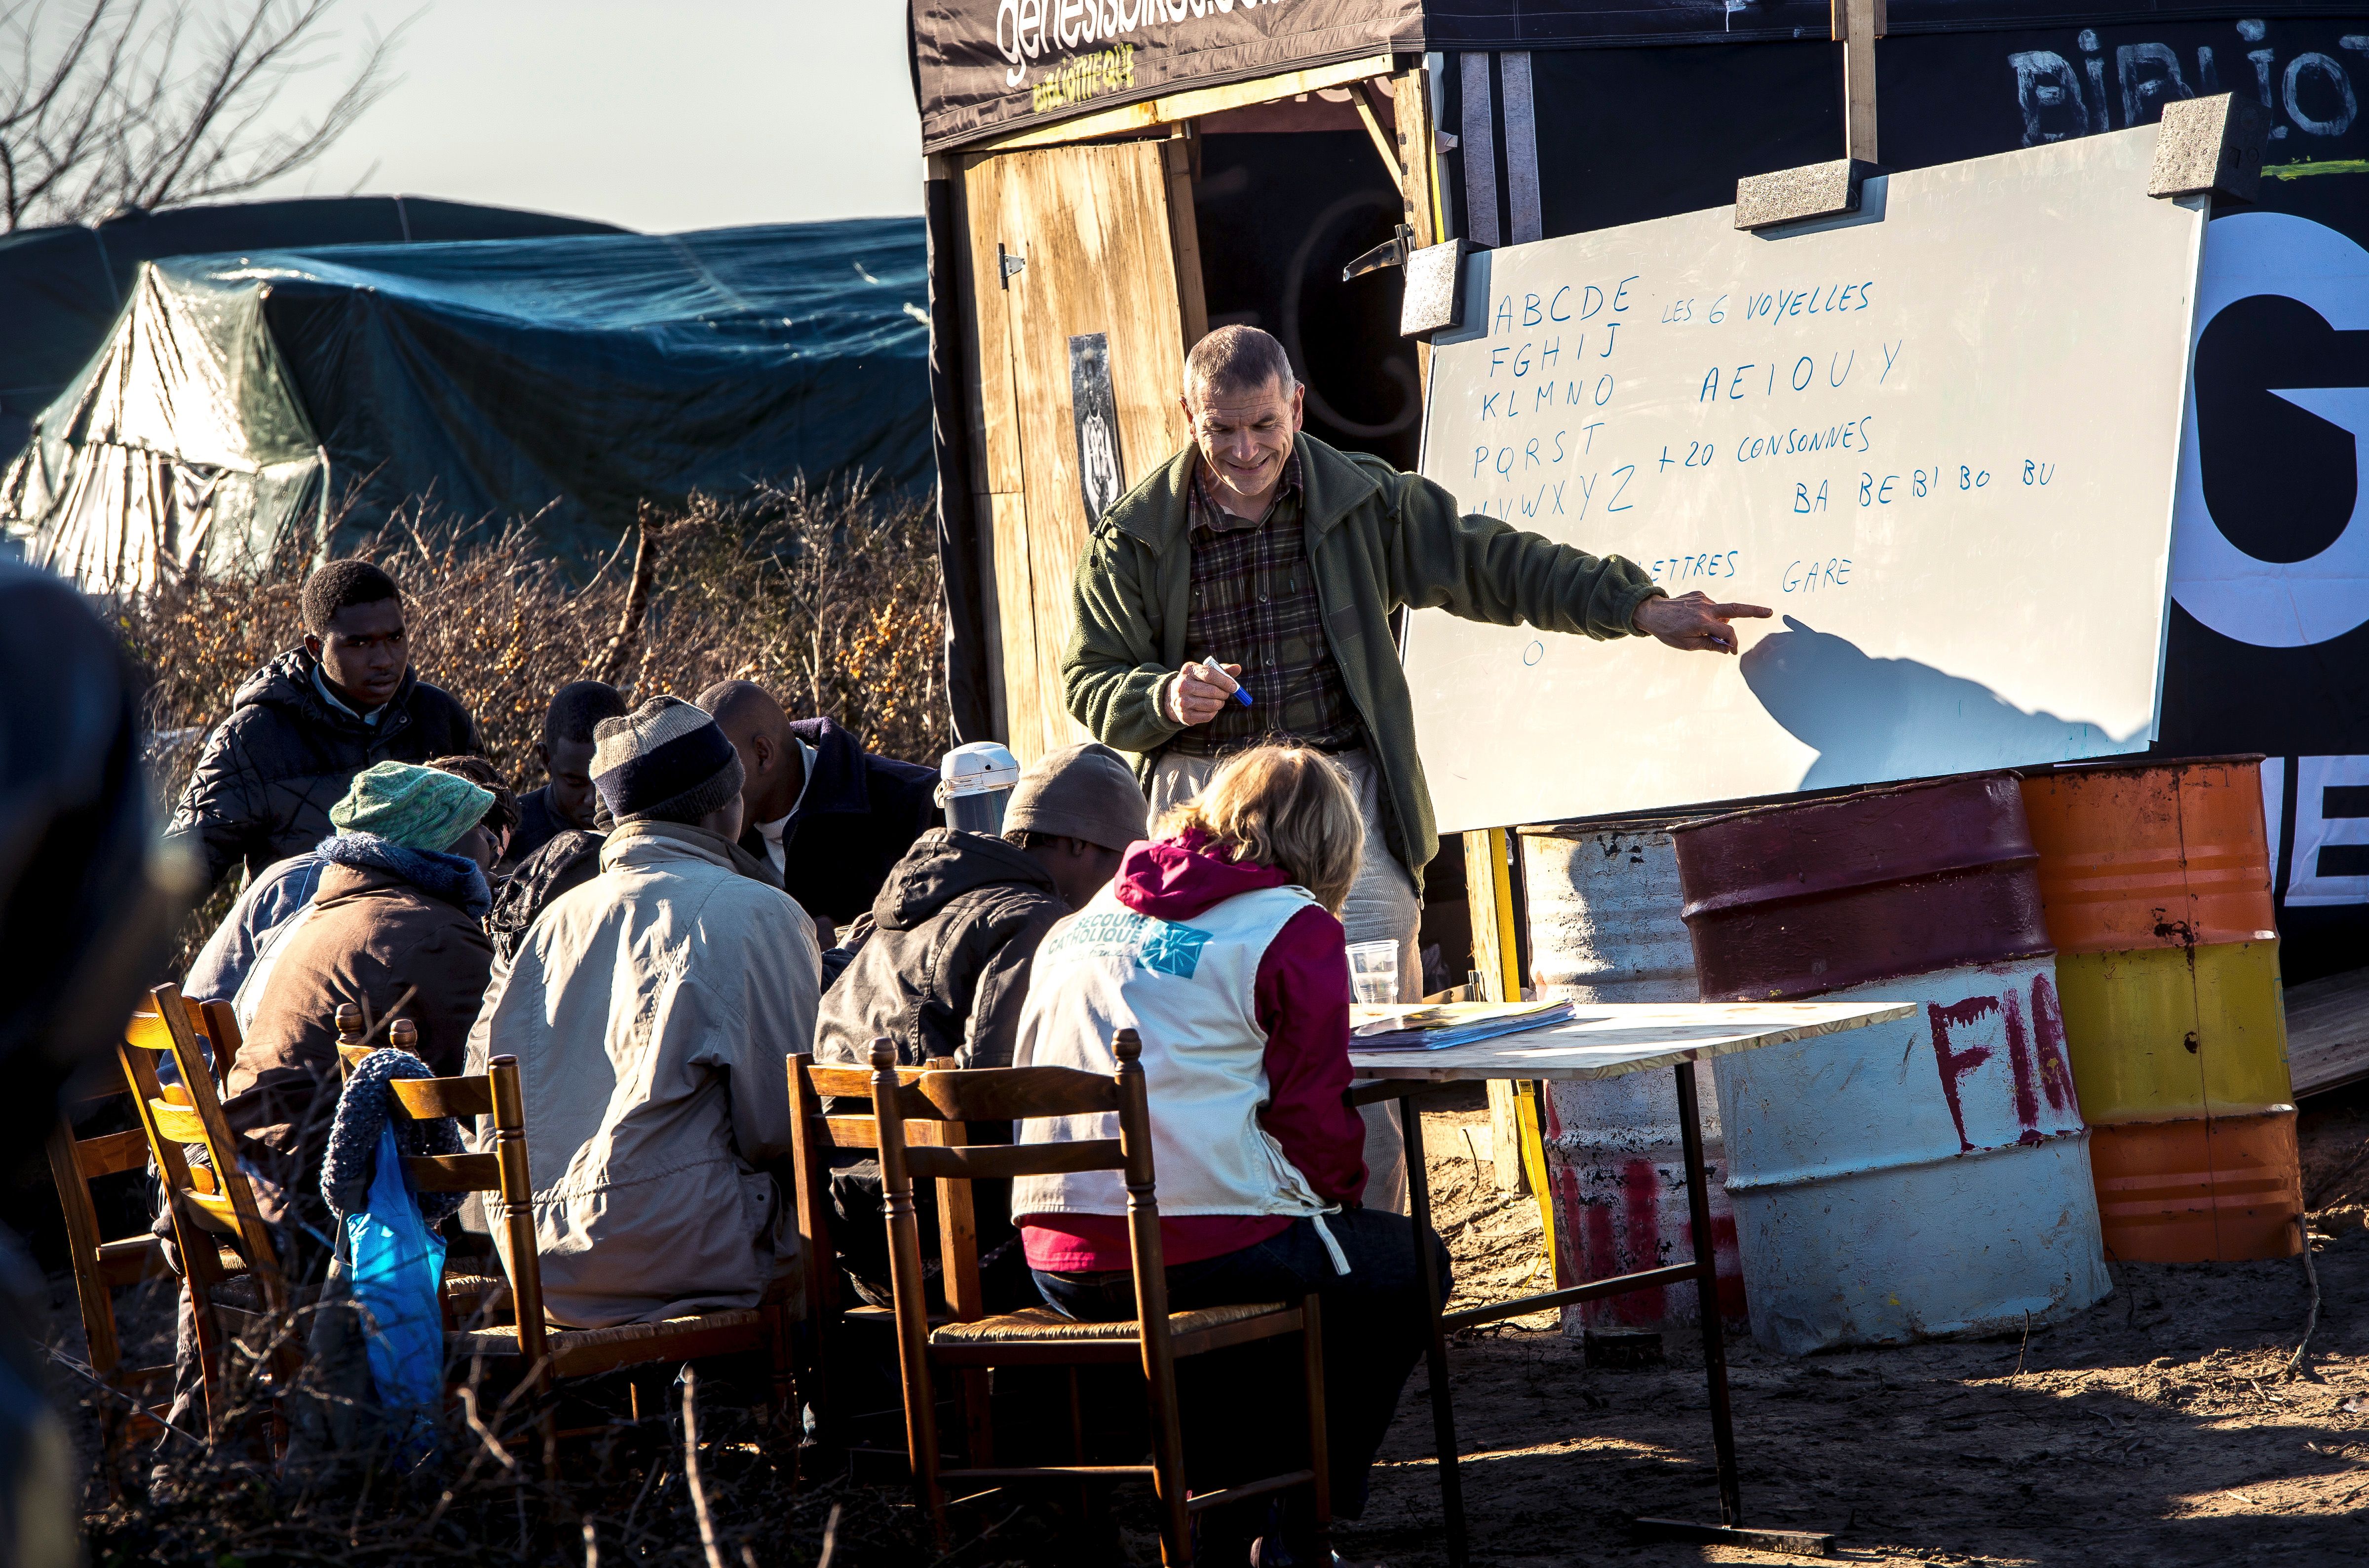 Migrant children are taught at a makeshift school in the "Jungle" camp in the port town of Calais, northern France in February 2016.